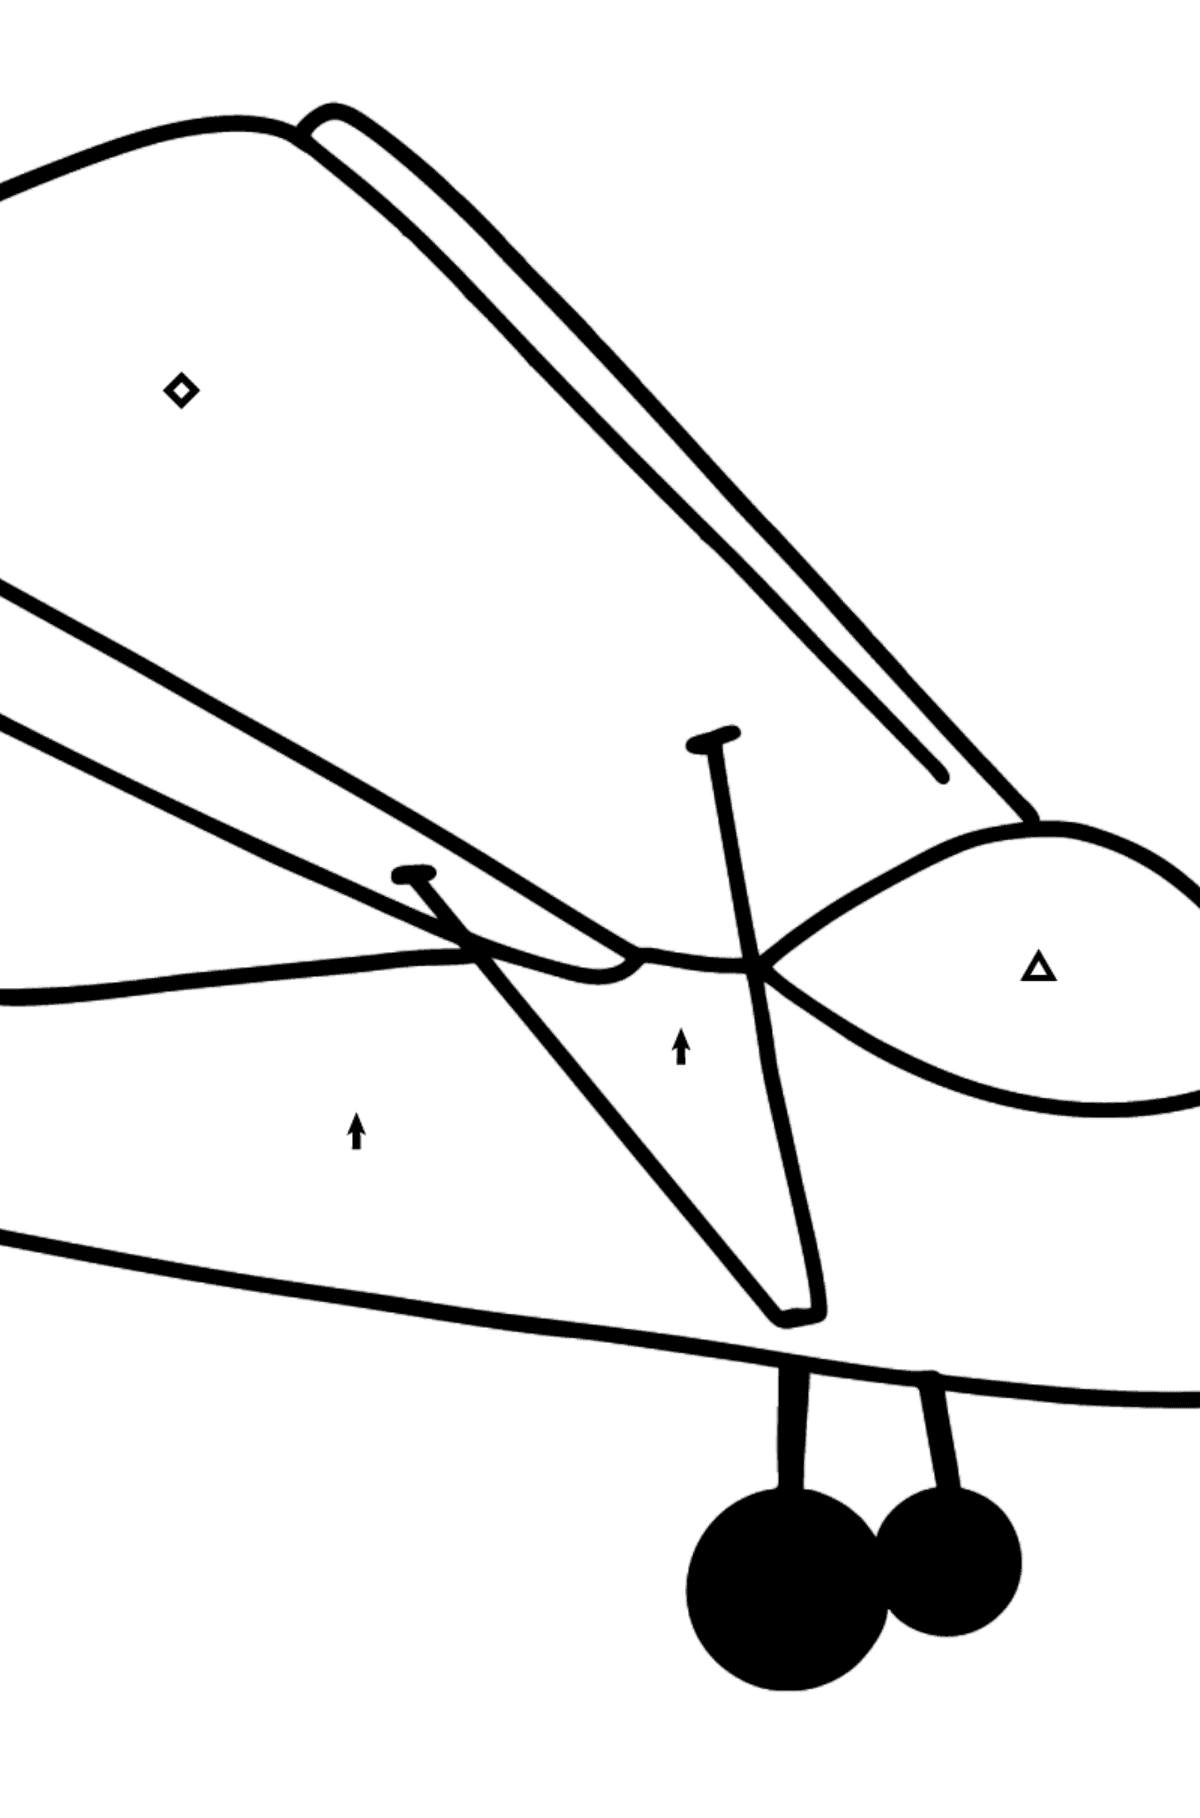 Small Plane coloring page - Coloring by Symbols for Kids